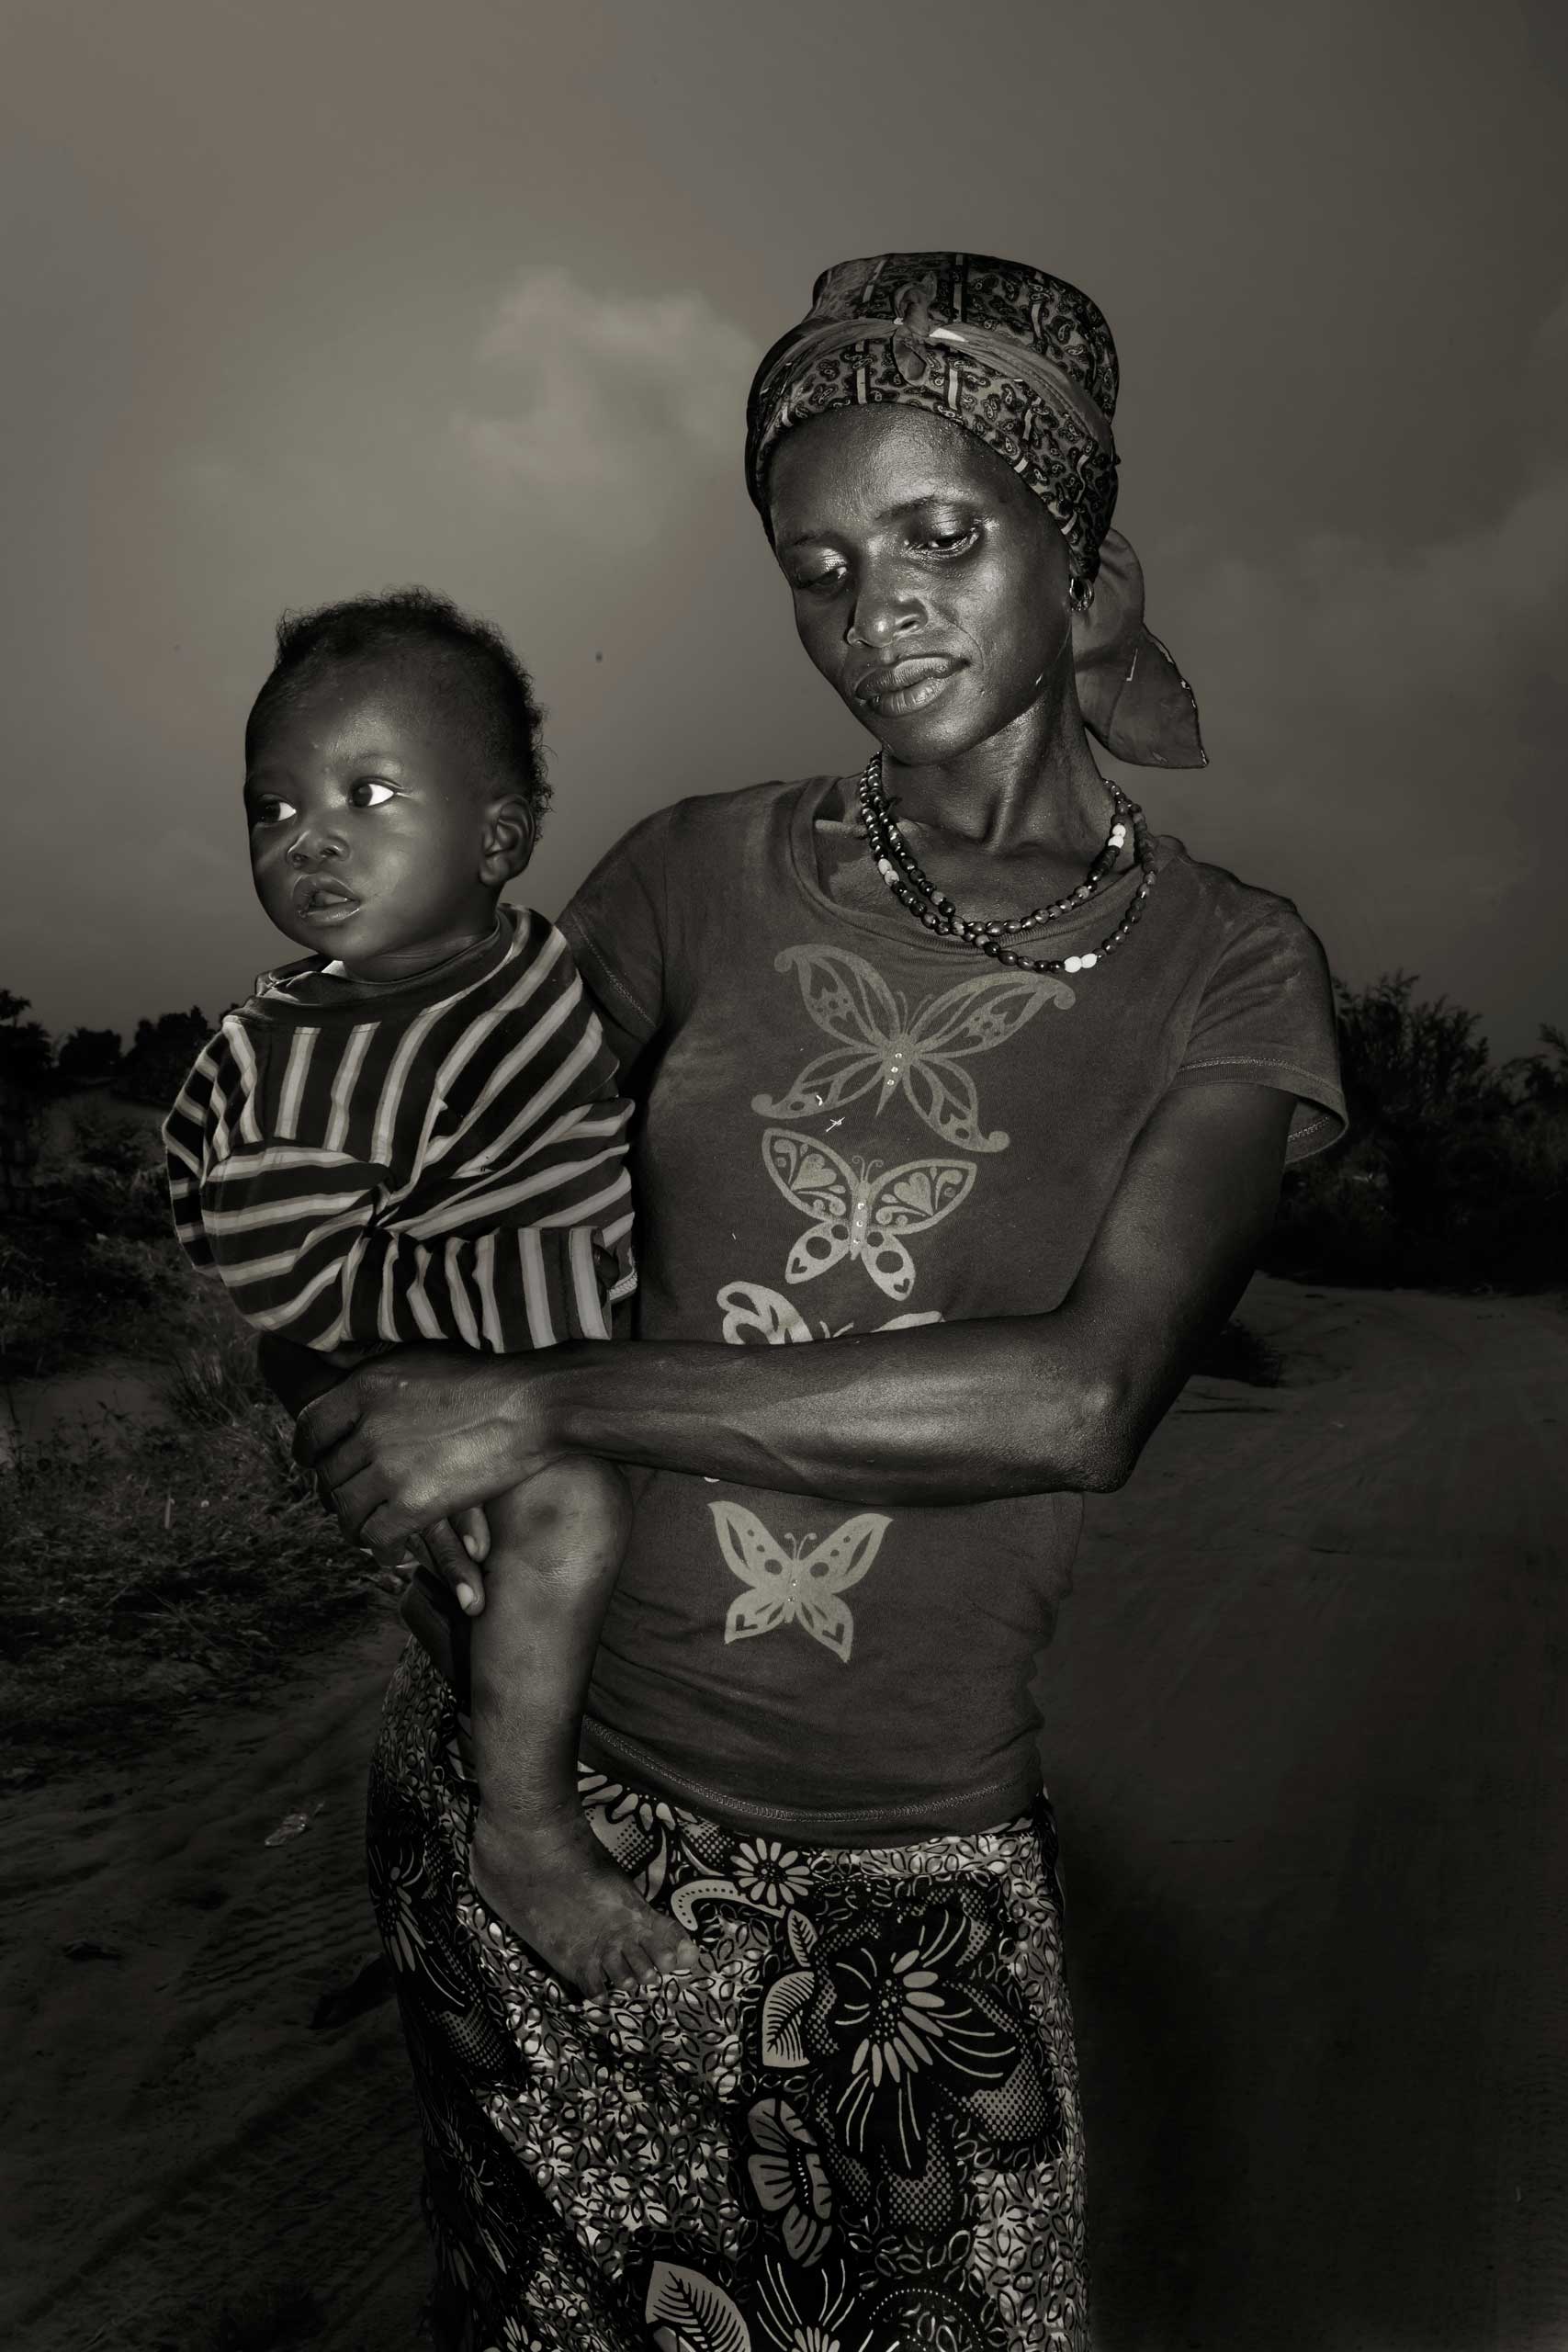 Professional Portraiture First Place. Ebola Survivors. Fatmata Kamara, 25, with her son Koday, 1. She contracted ebola together with her son. They both survived the infection and live in Waterloo, a village developed from a refugee camp,